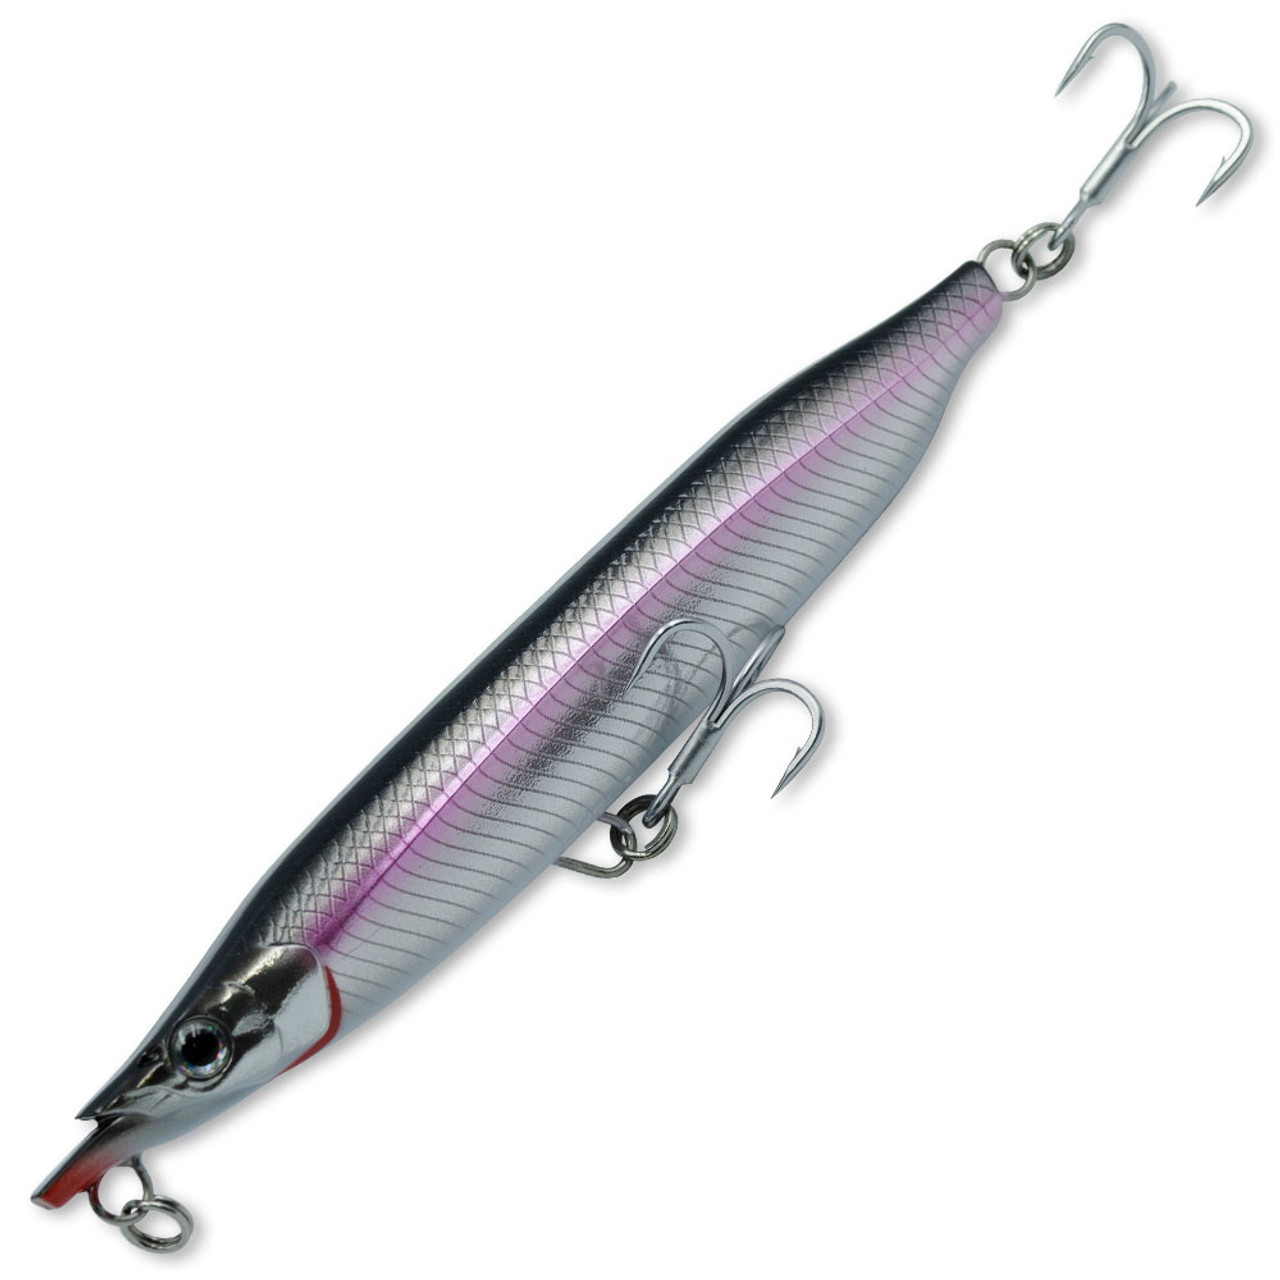 Buy Jarvis Walker 60mm Bream Lure Pack - 5 Pack of Hard Body Fishing Lures  at Barbeques Galore.